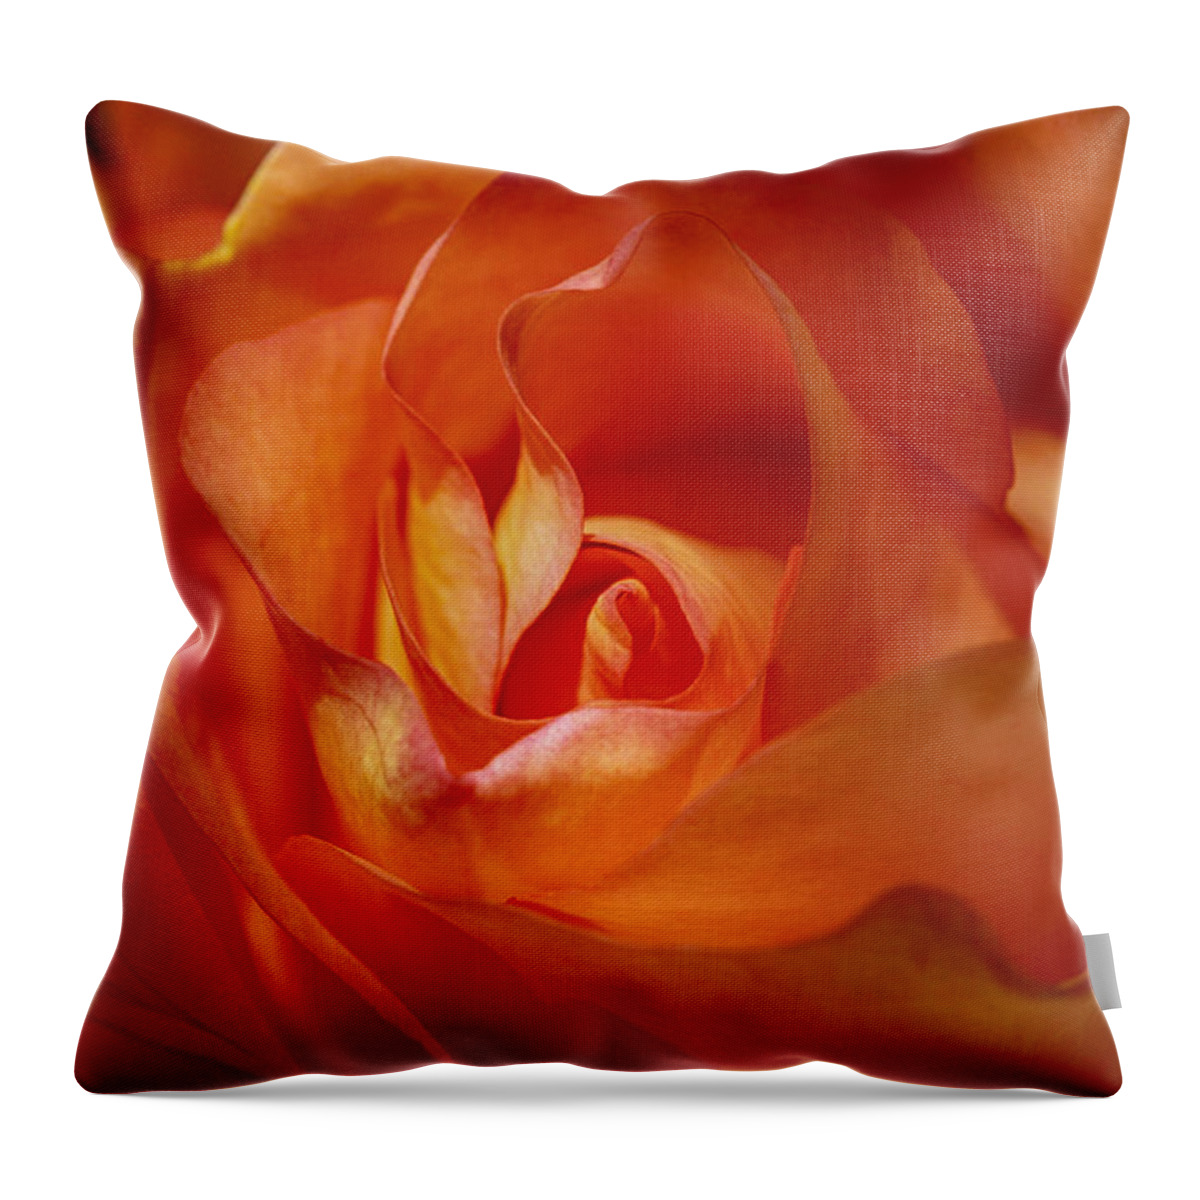 Orange Throw Pillow featuring the photograph Orange Passion #1 by Diana Haronis